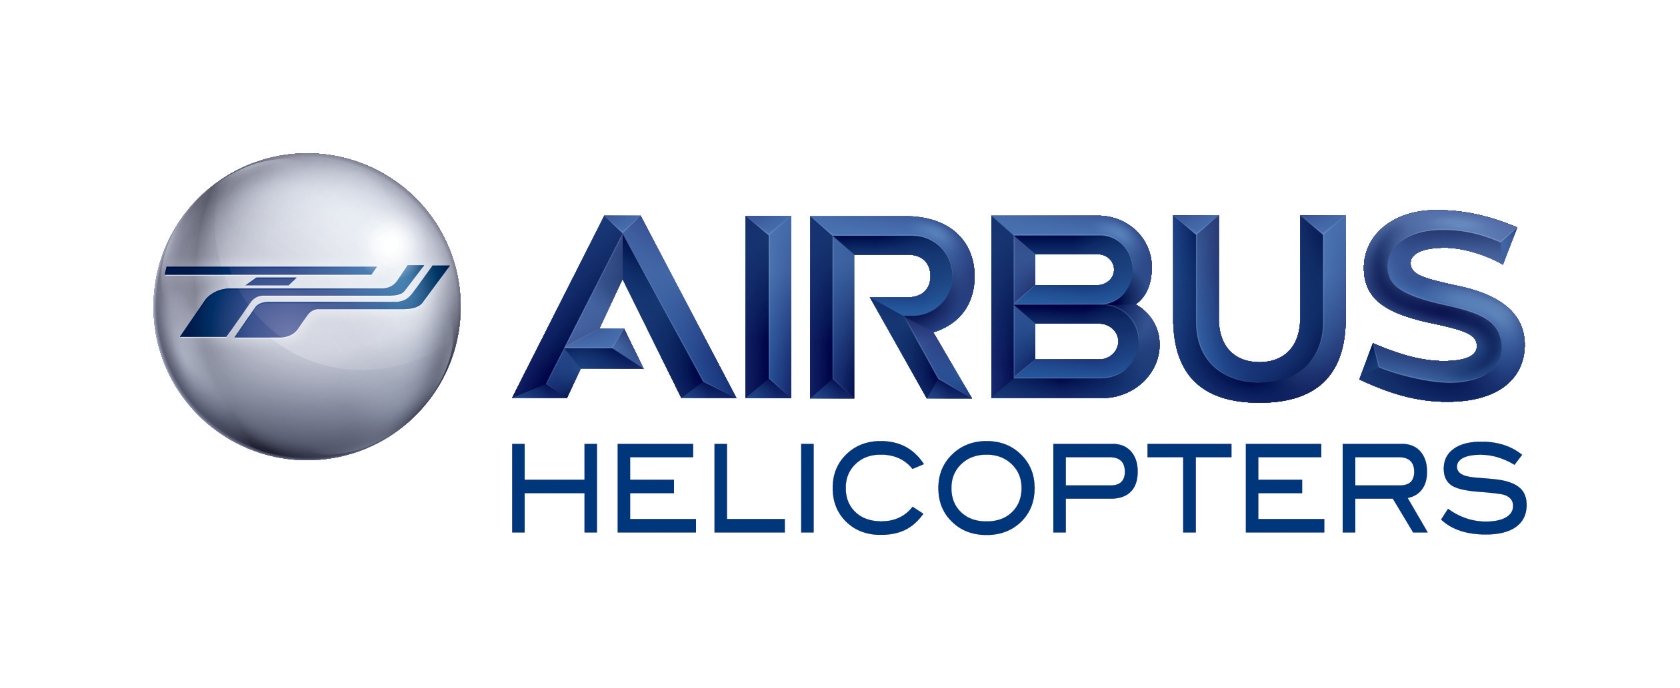 http://www.net4info.de/photos/cpg/albums/userpics/10001/Airbus_Helicopters.jpg